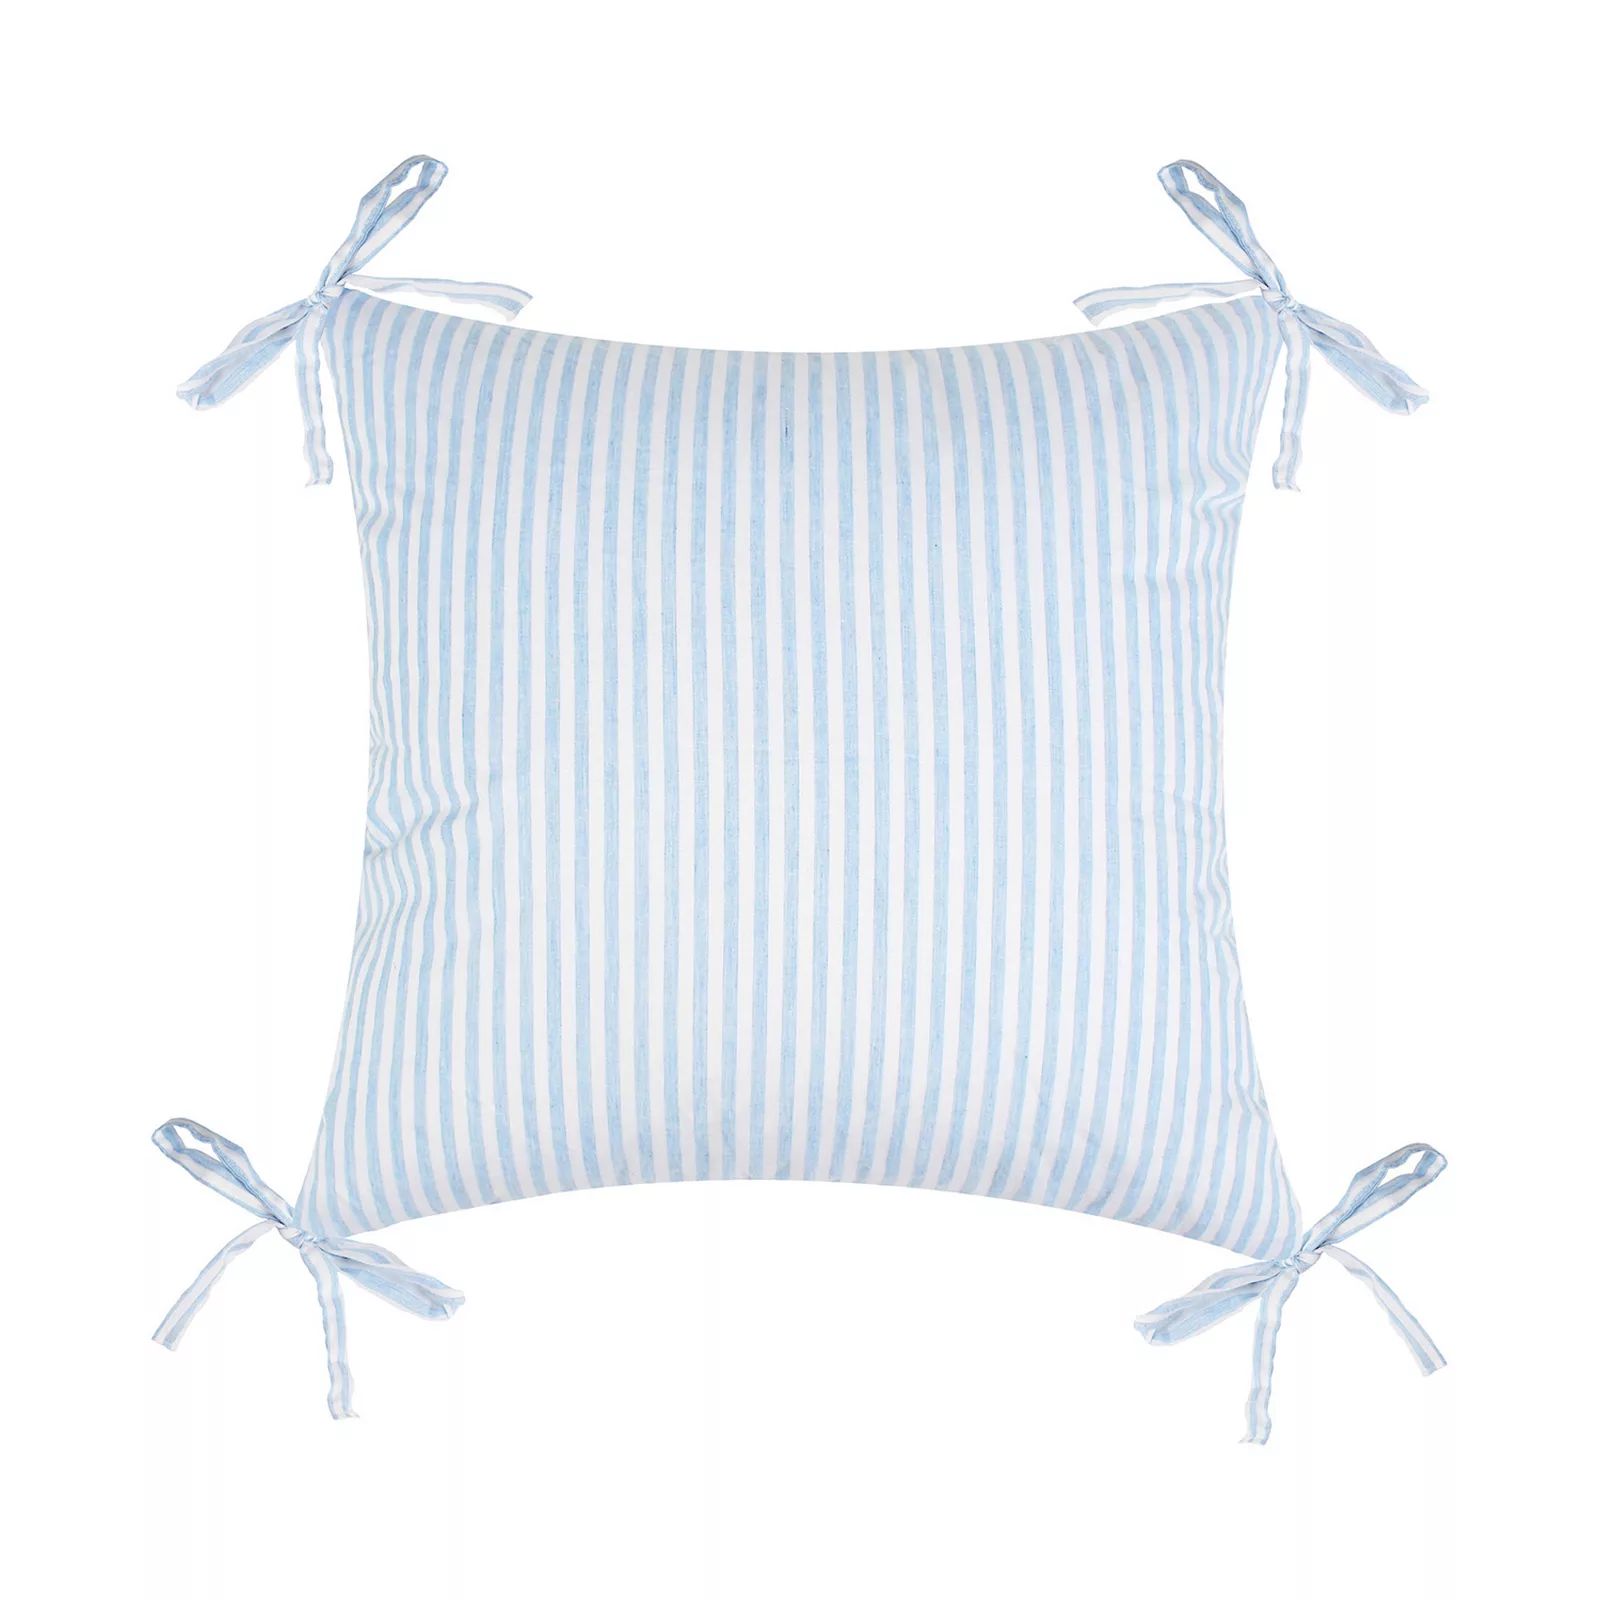 Draper James Striped Decorative Pillow with Bows, Blue, Fits All | Kohl's